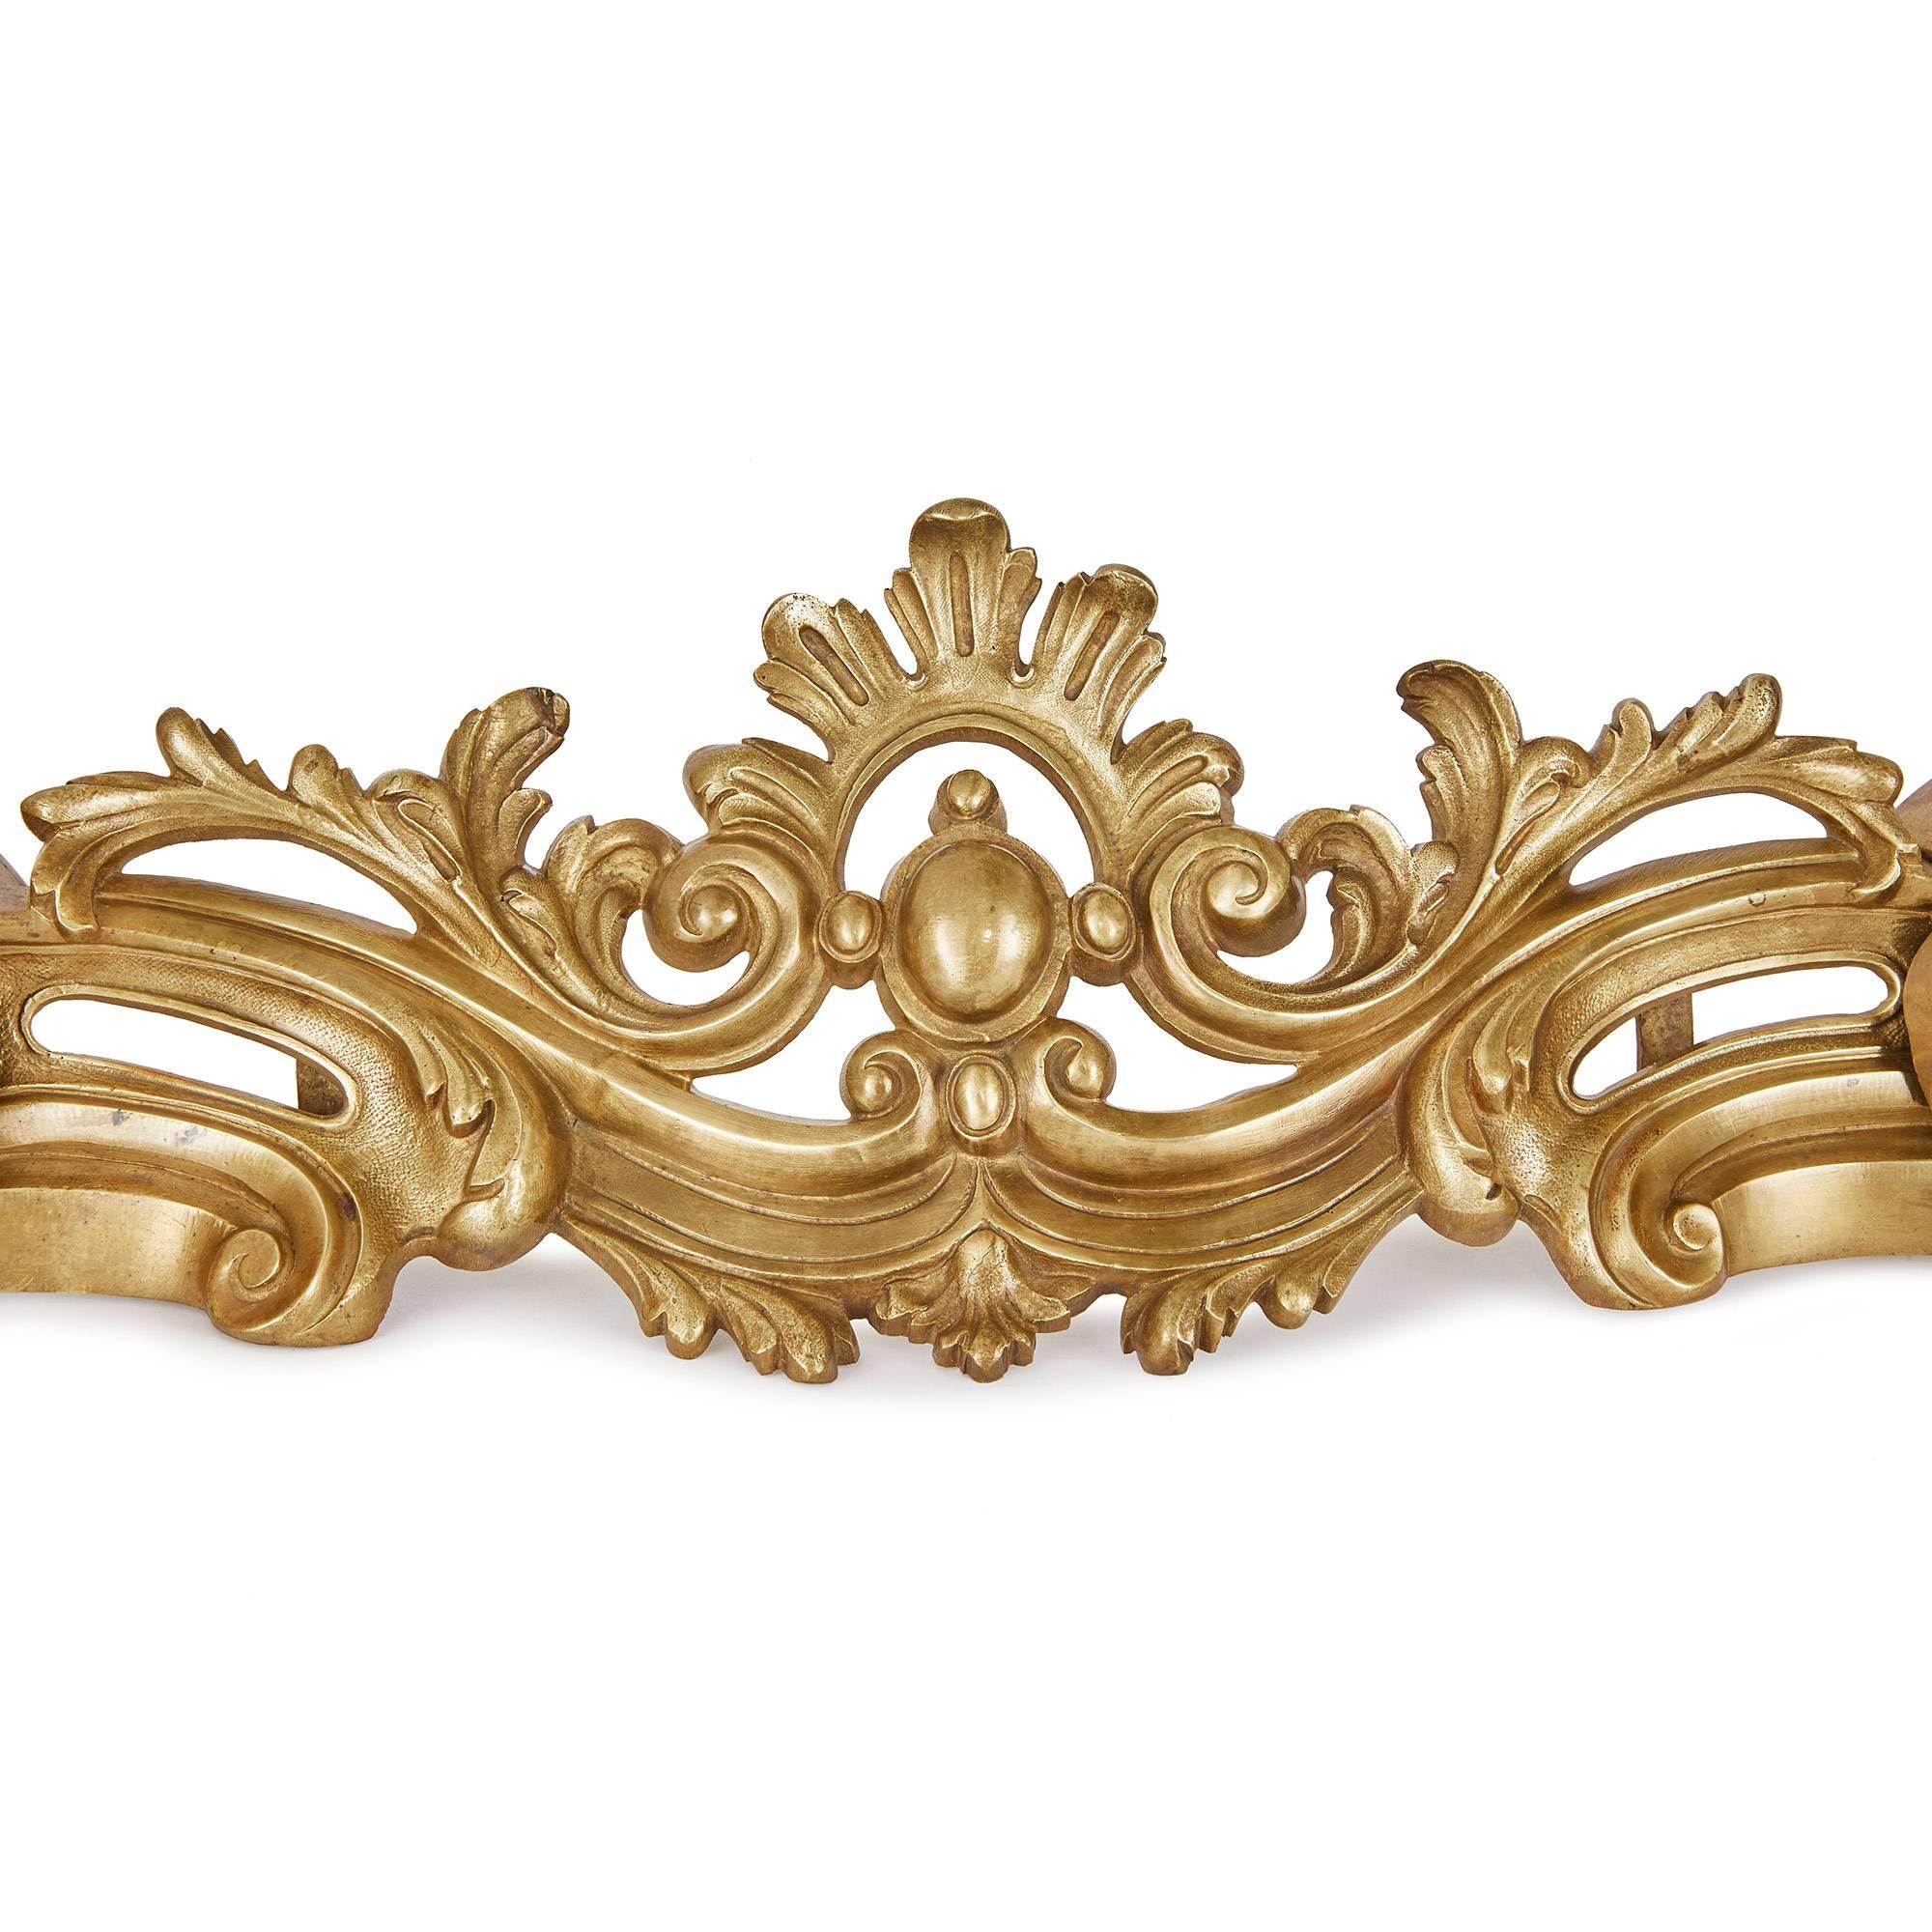 This elegant gilt bronze fireplace fender is decorated in a manner typical of the Rococo style. Featuring large, swirling foliate embellishments, the work is permeated with a sense of dynamism and movement, particularly at its C-shaped edges, and